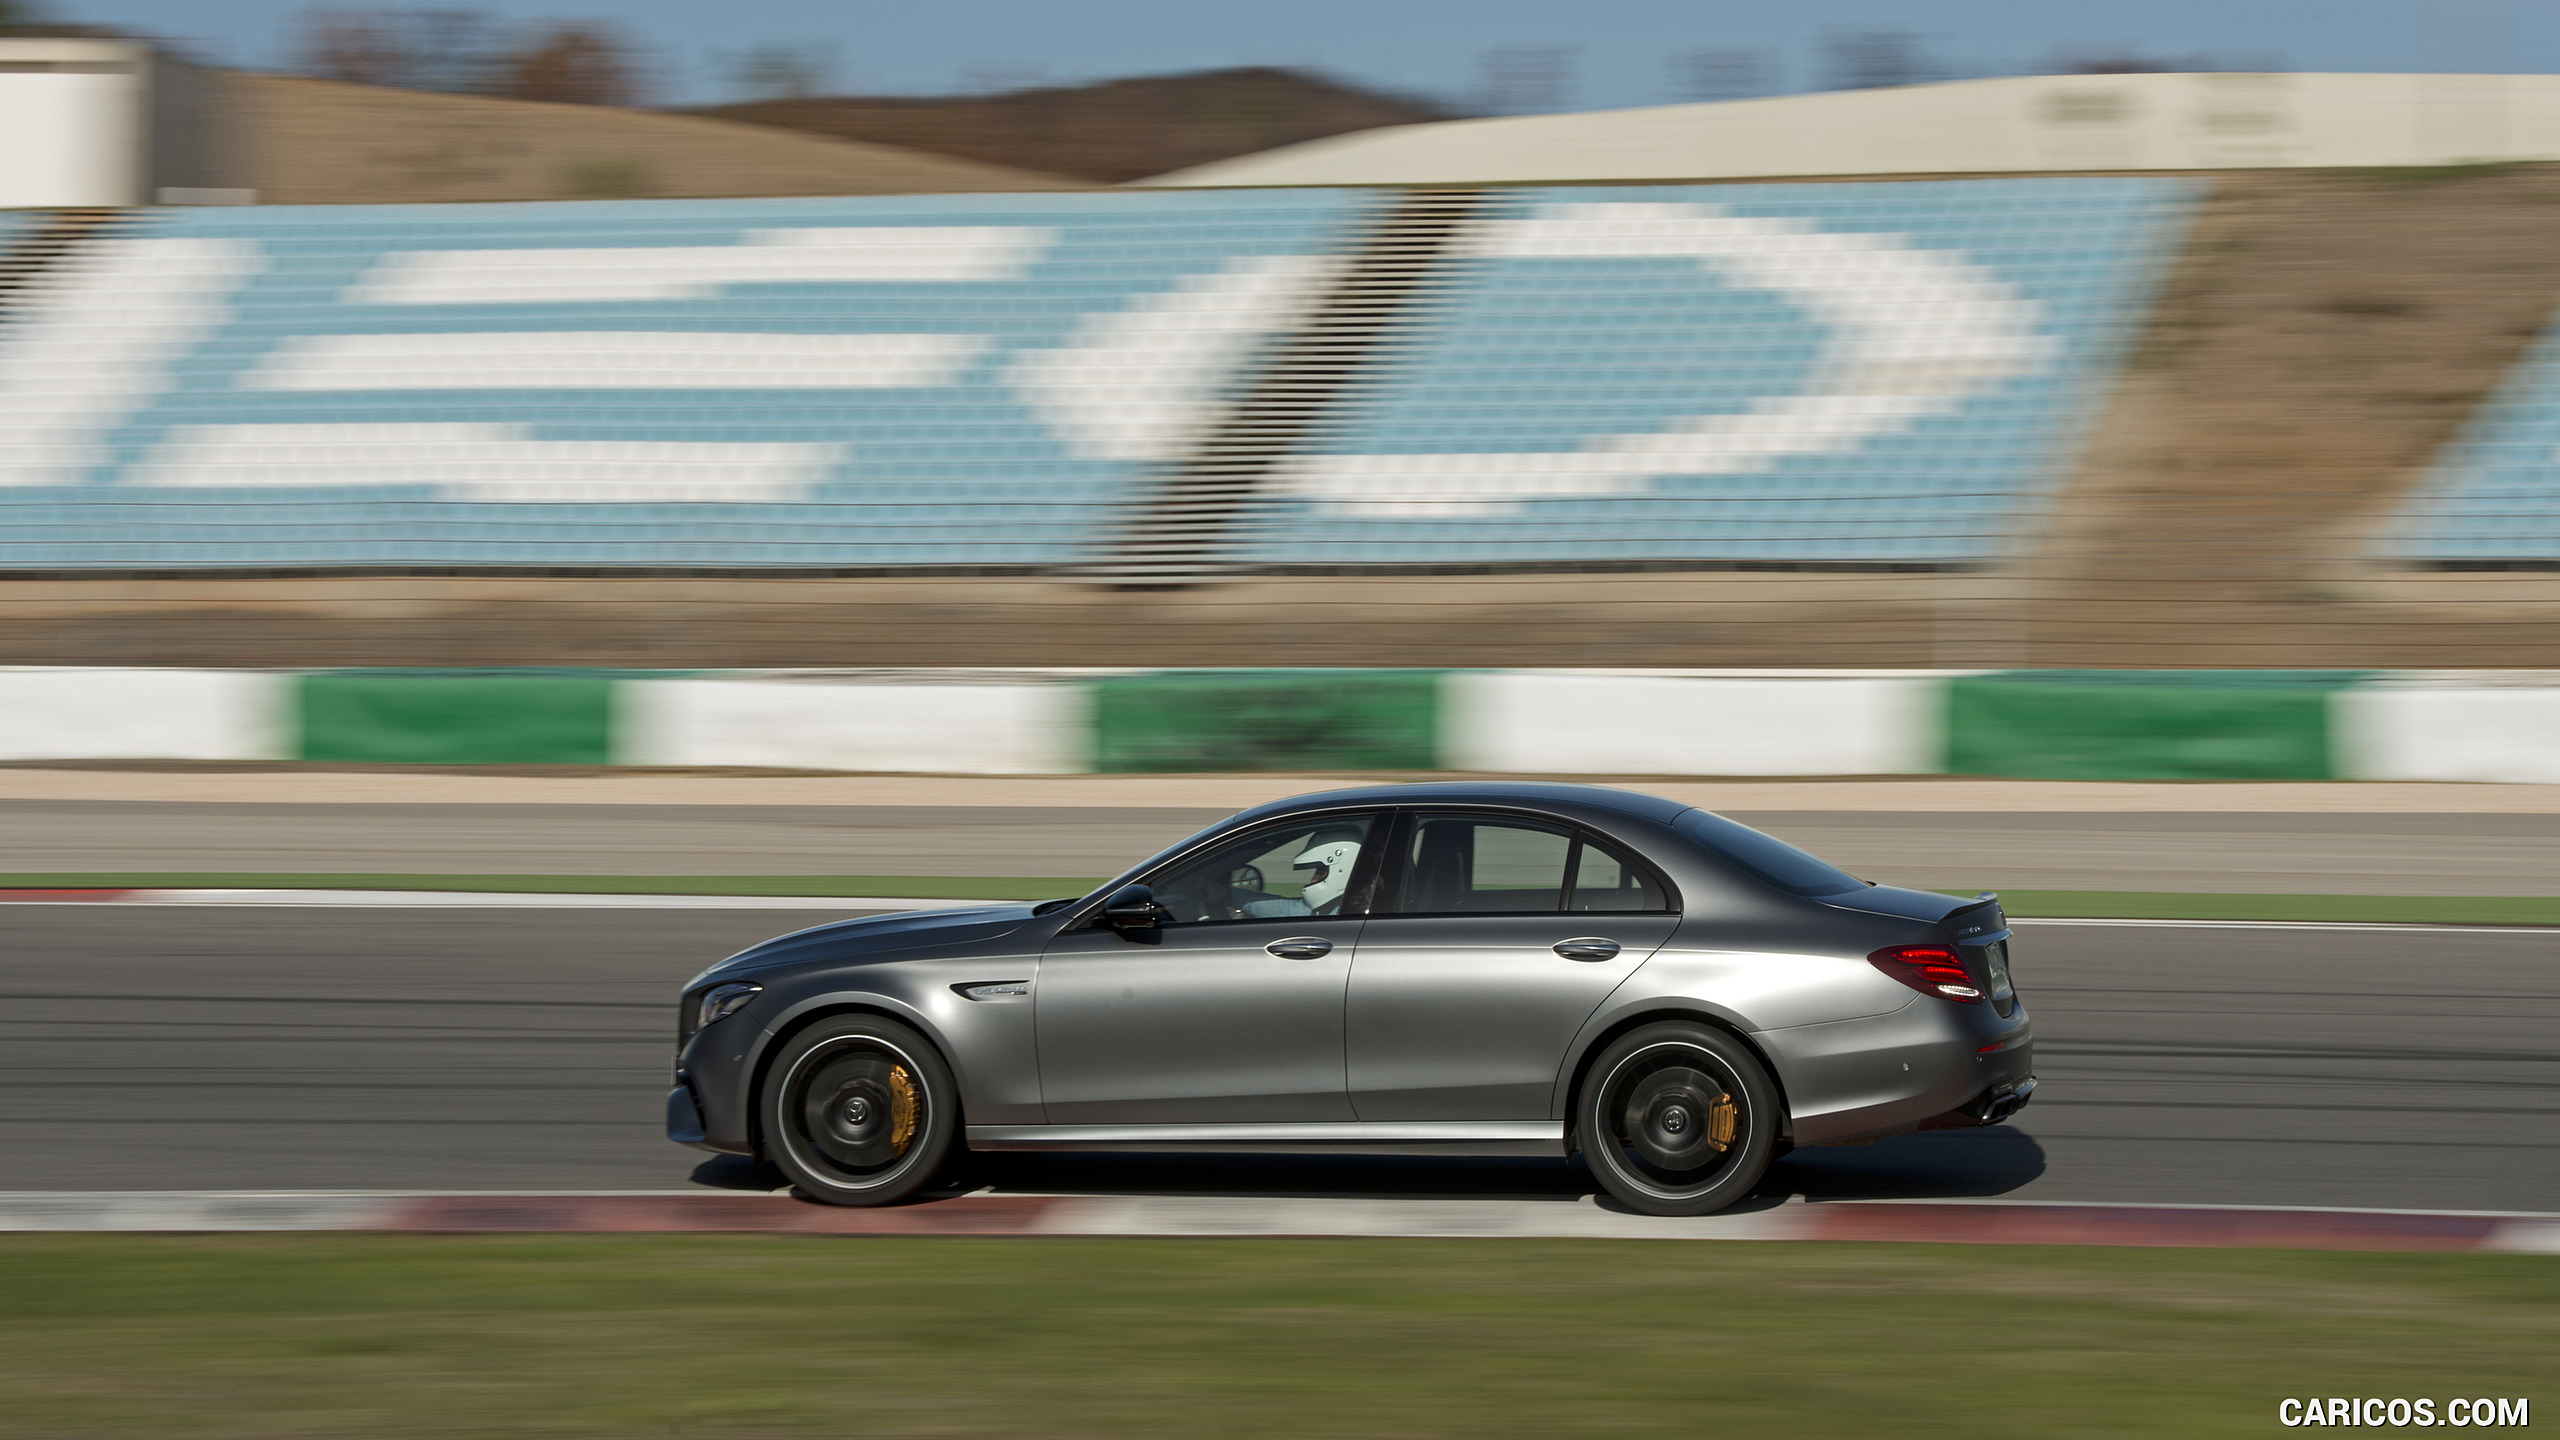 2018 Mercedes-AMG E63 S 4MATIC+ - Side, #256 of 323